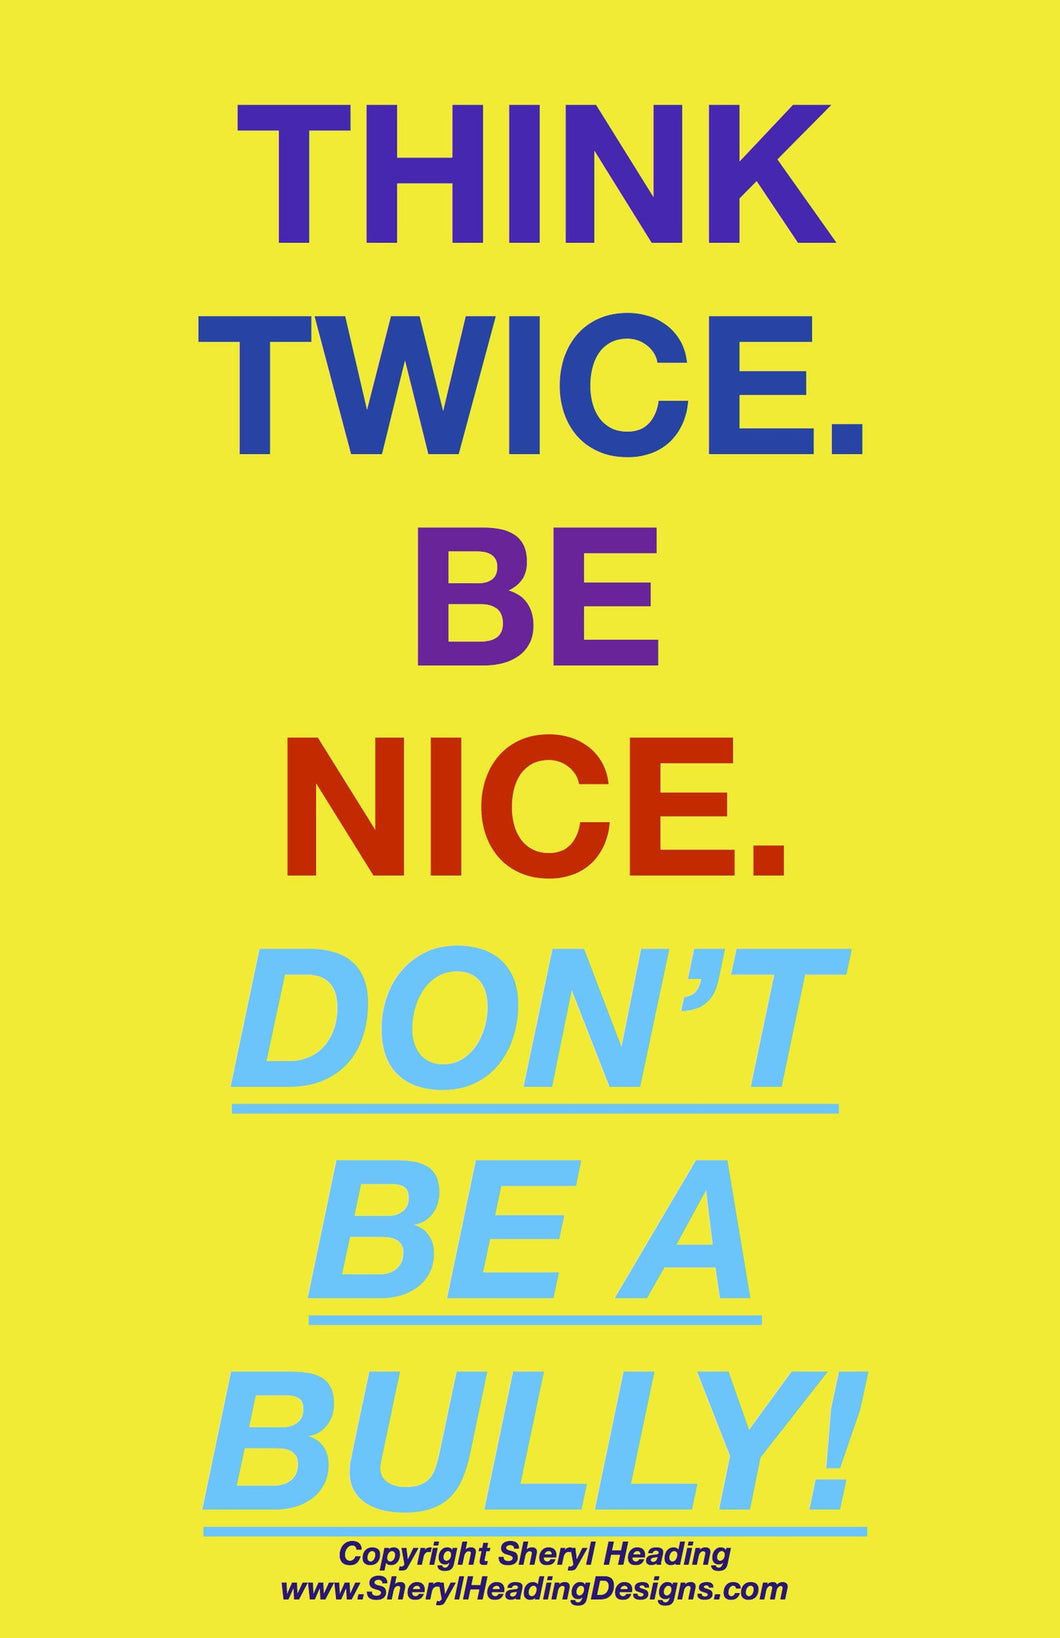 Think Twice Be Nice Don't Be A Bully Poster - Sheryl Heading Designs